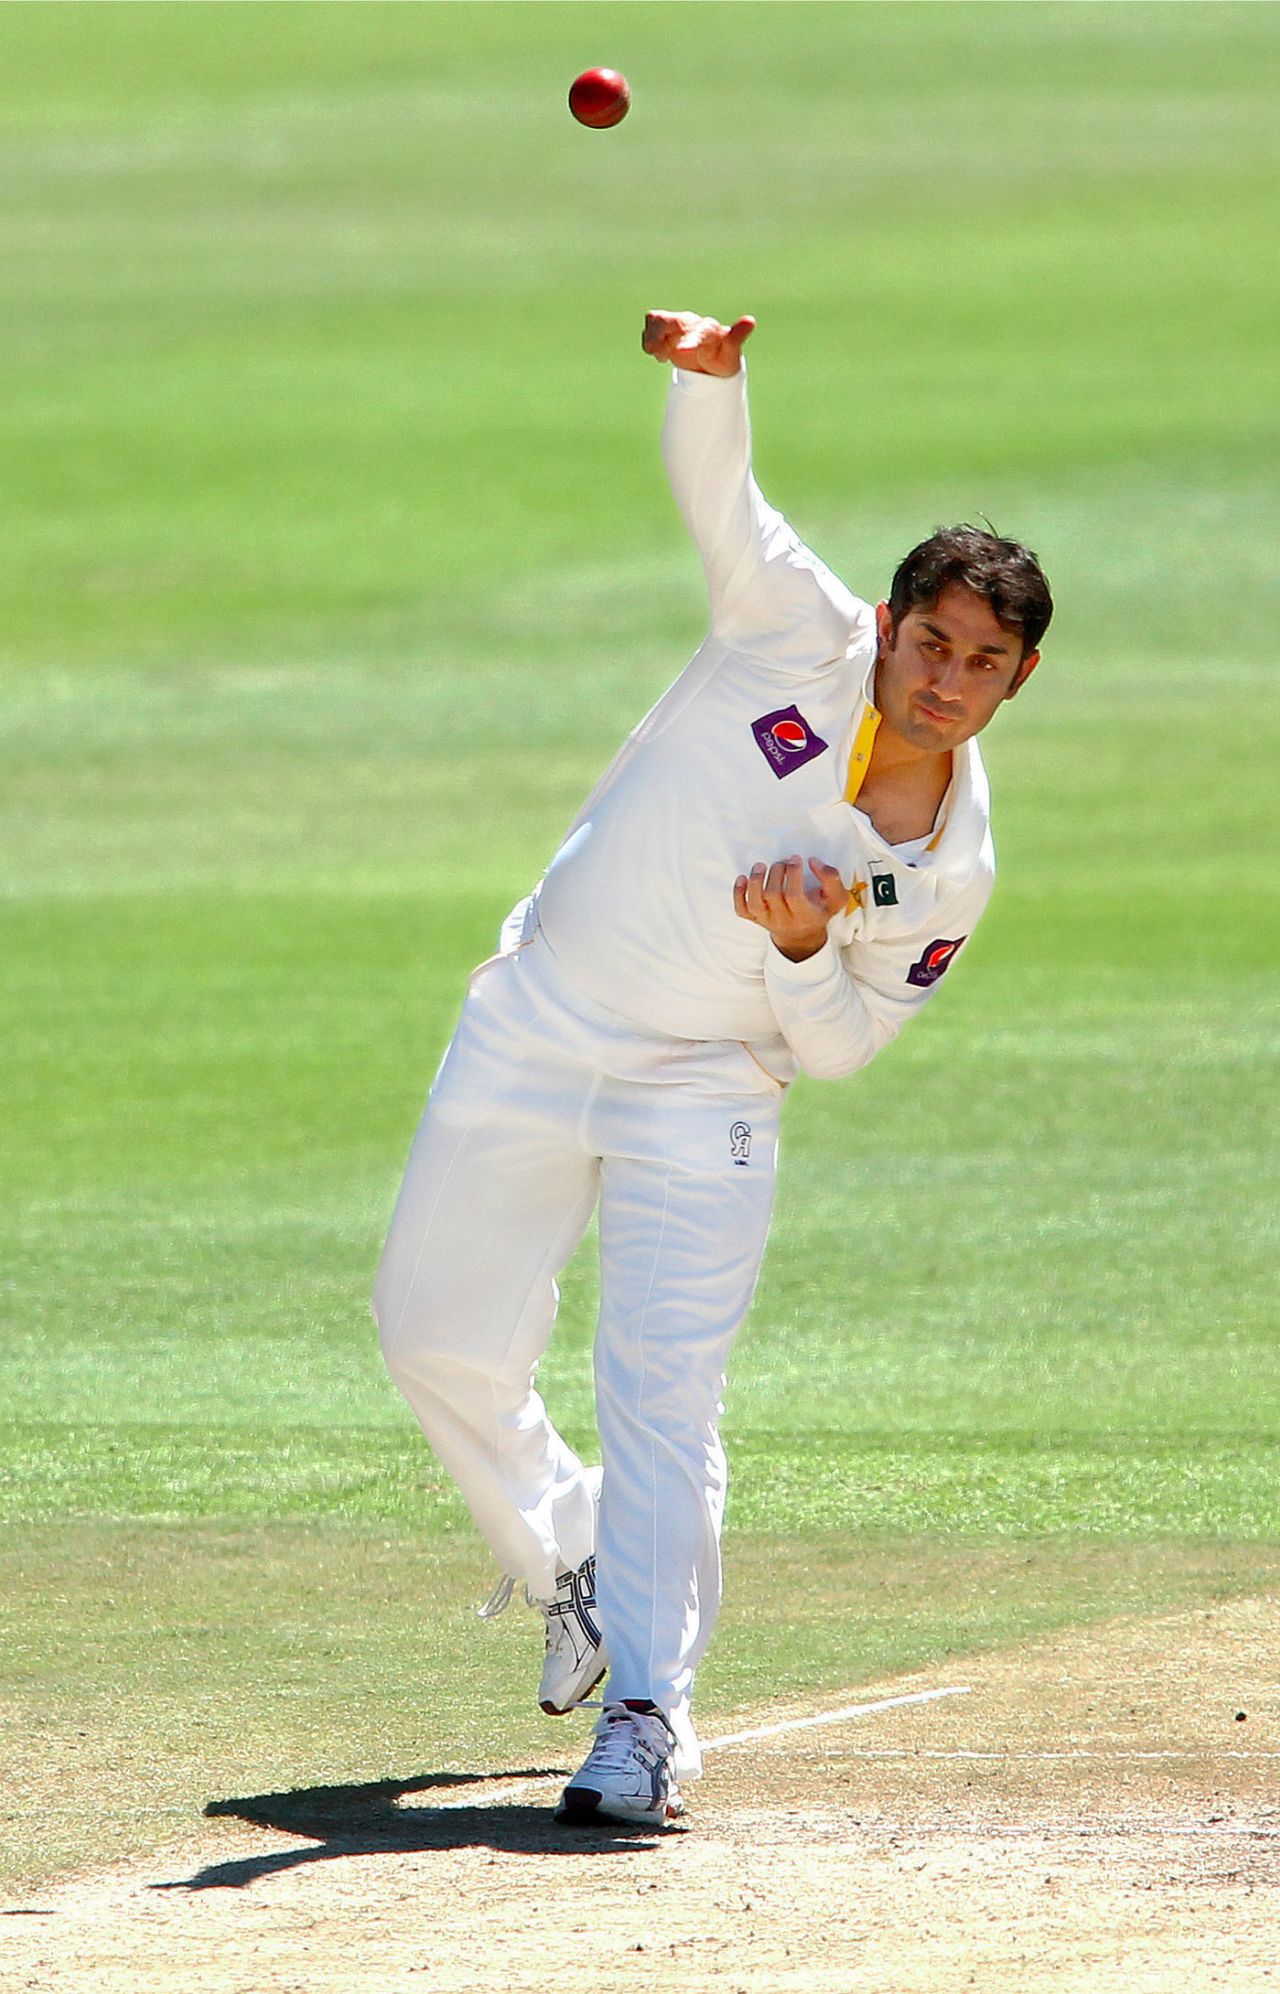 Saeed Ajmal bowls, South Africa v Pakistan, 2nd Test, Cape Town, 3rd day, February 16, 2013